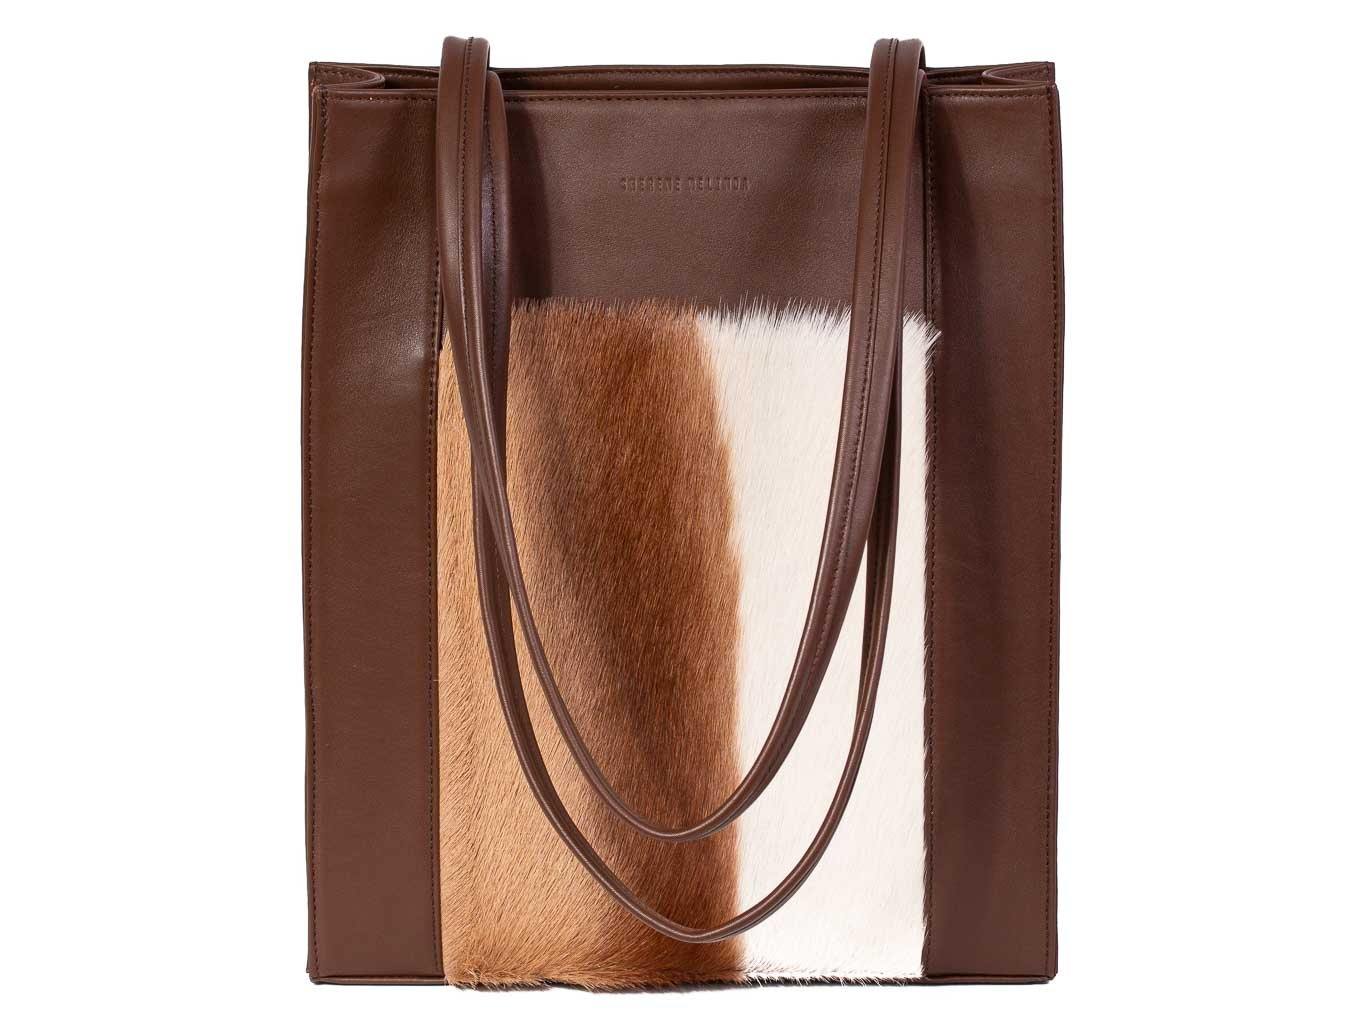 Tote Springbok Handbag in Cocoa Brown with a stripe feature by Sherene Melinda front handle